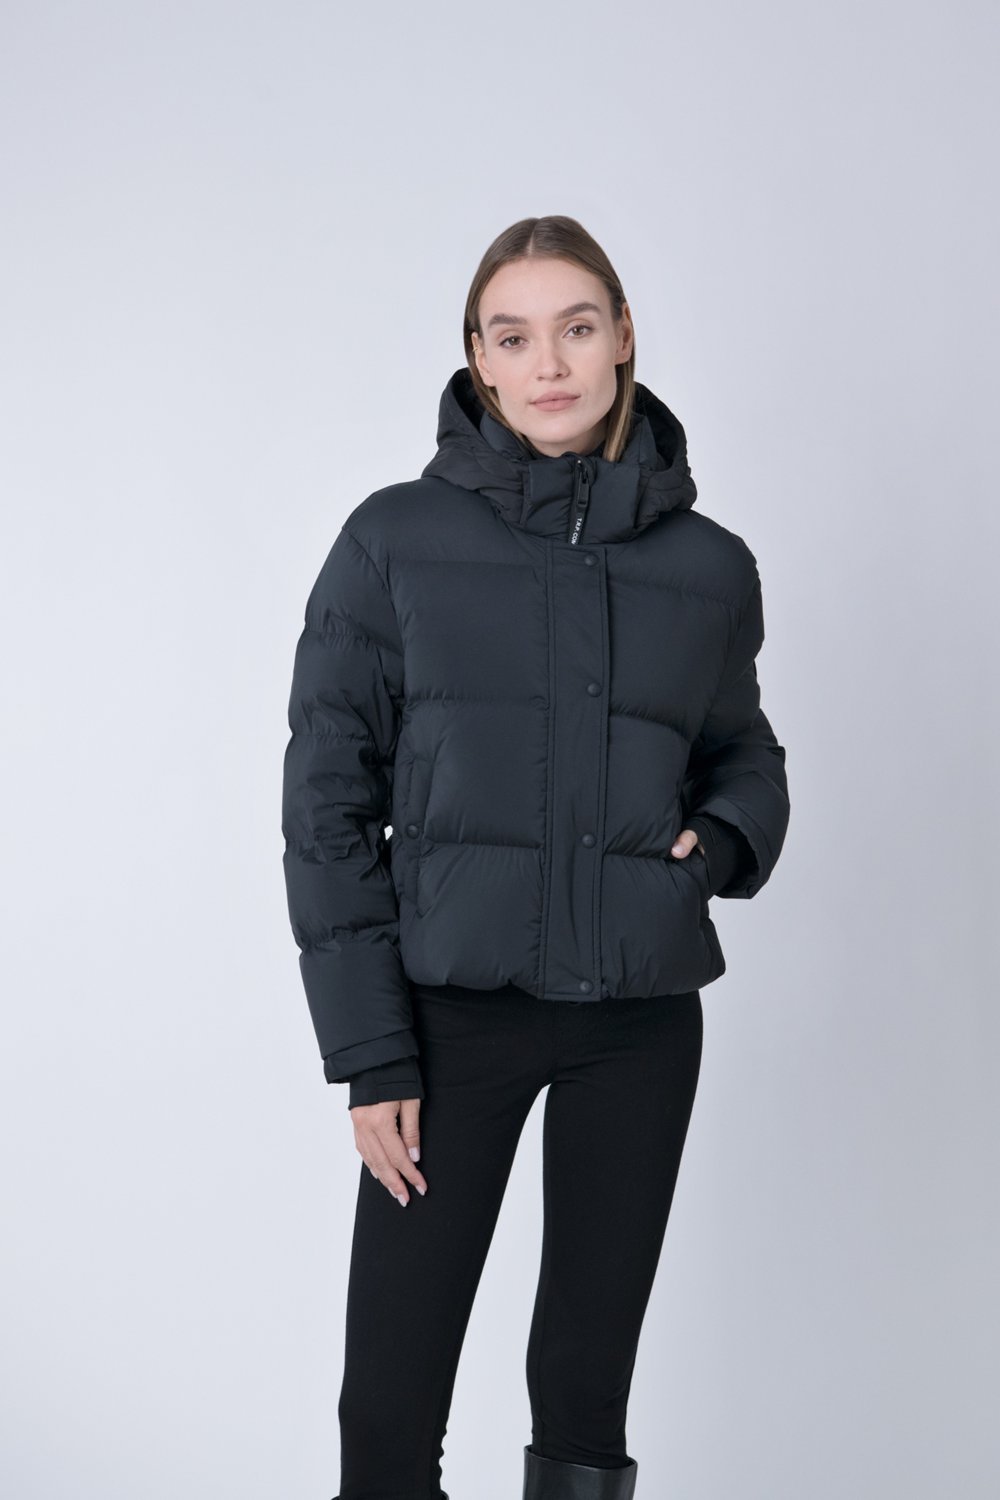 The Recycled Planet Womens Ritz Jacket